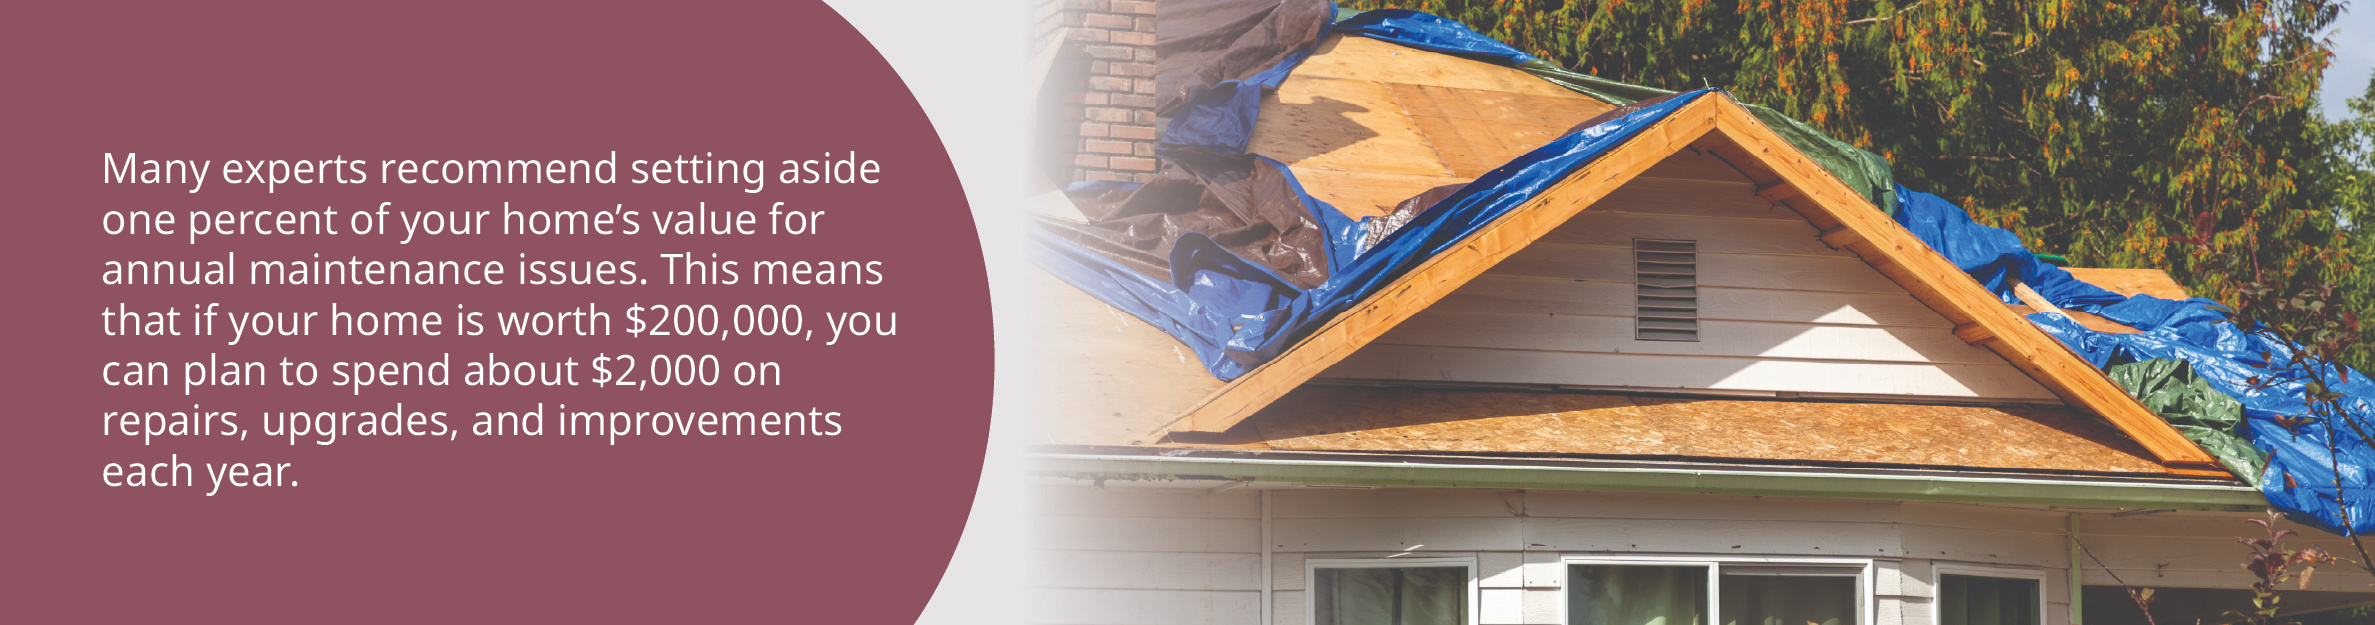 Photo: House repairs
Text: Many experts recommend setting aside one percent of your home's value for annual maintenance issues. This means that if your home is worth $200,000, you can plan to spend about $2,000 on repairs, upgrade, and improvements each year.